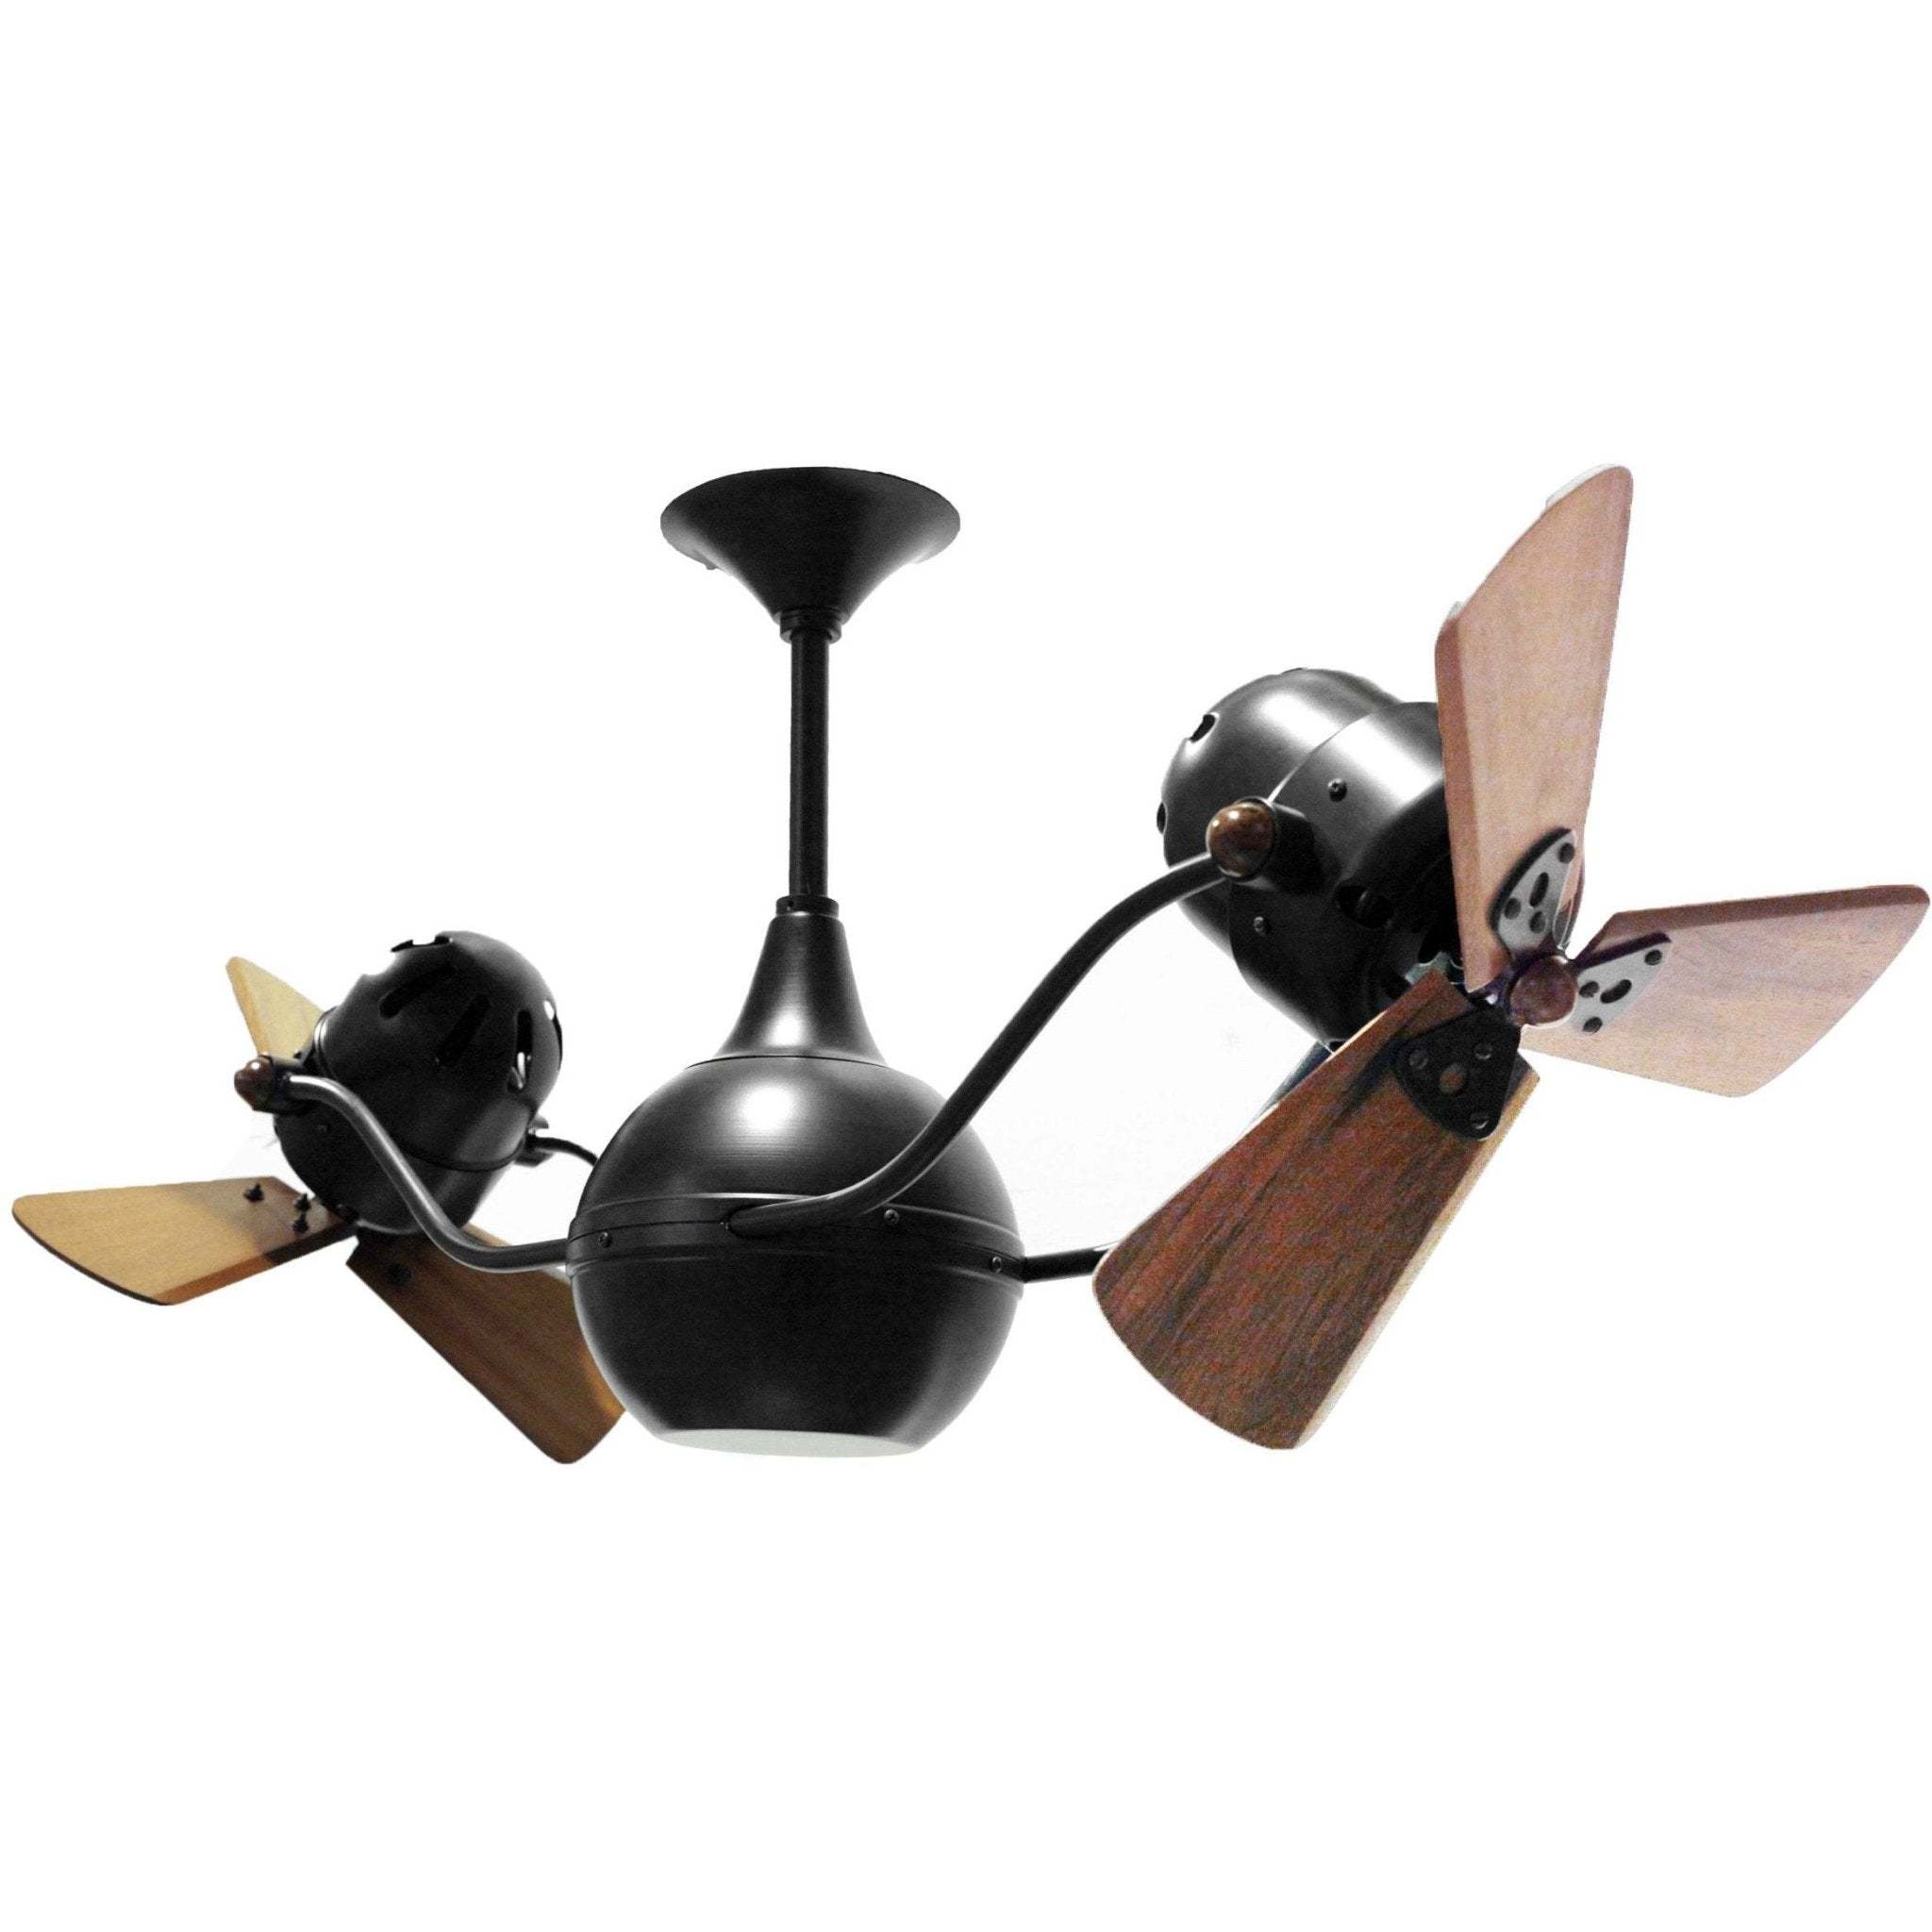 Vent Bettina Dual Ceiling Fan - Wood Blades - Image 1